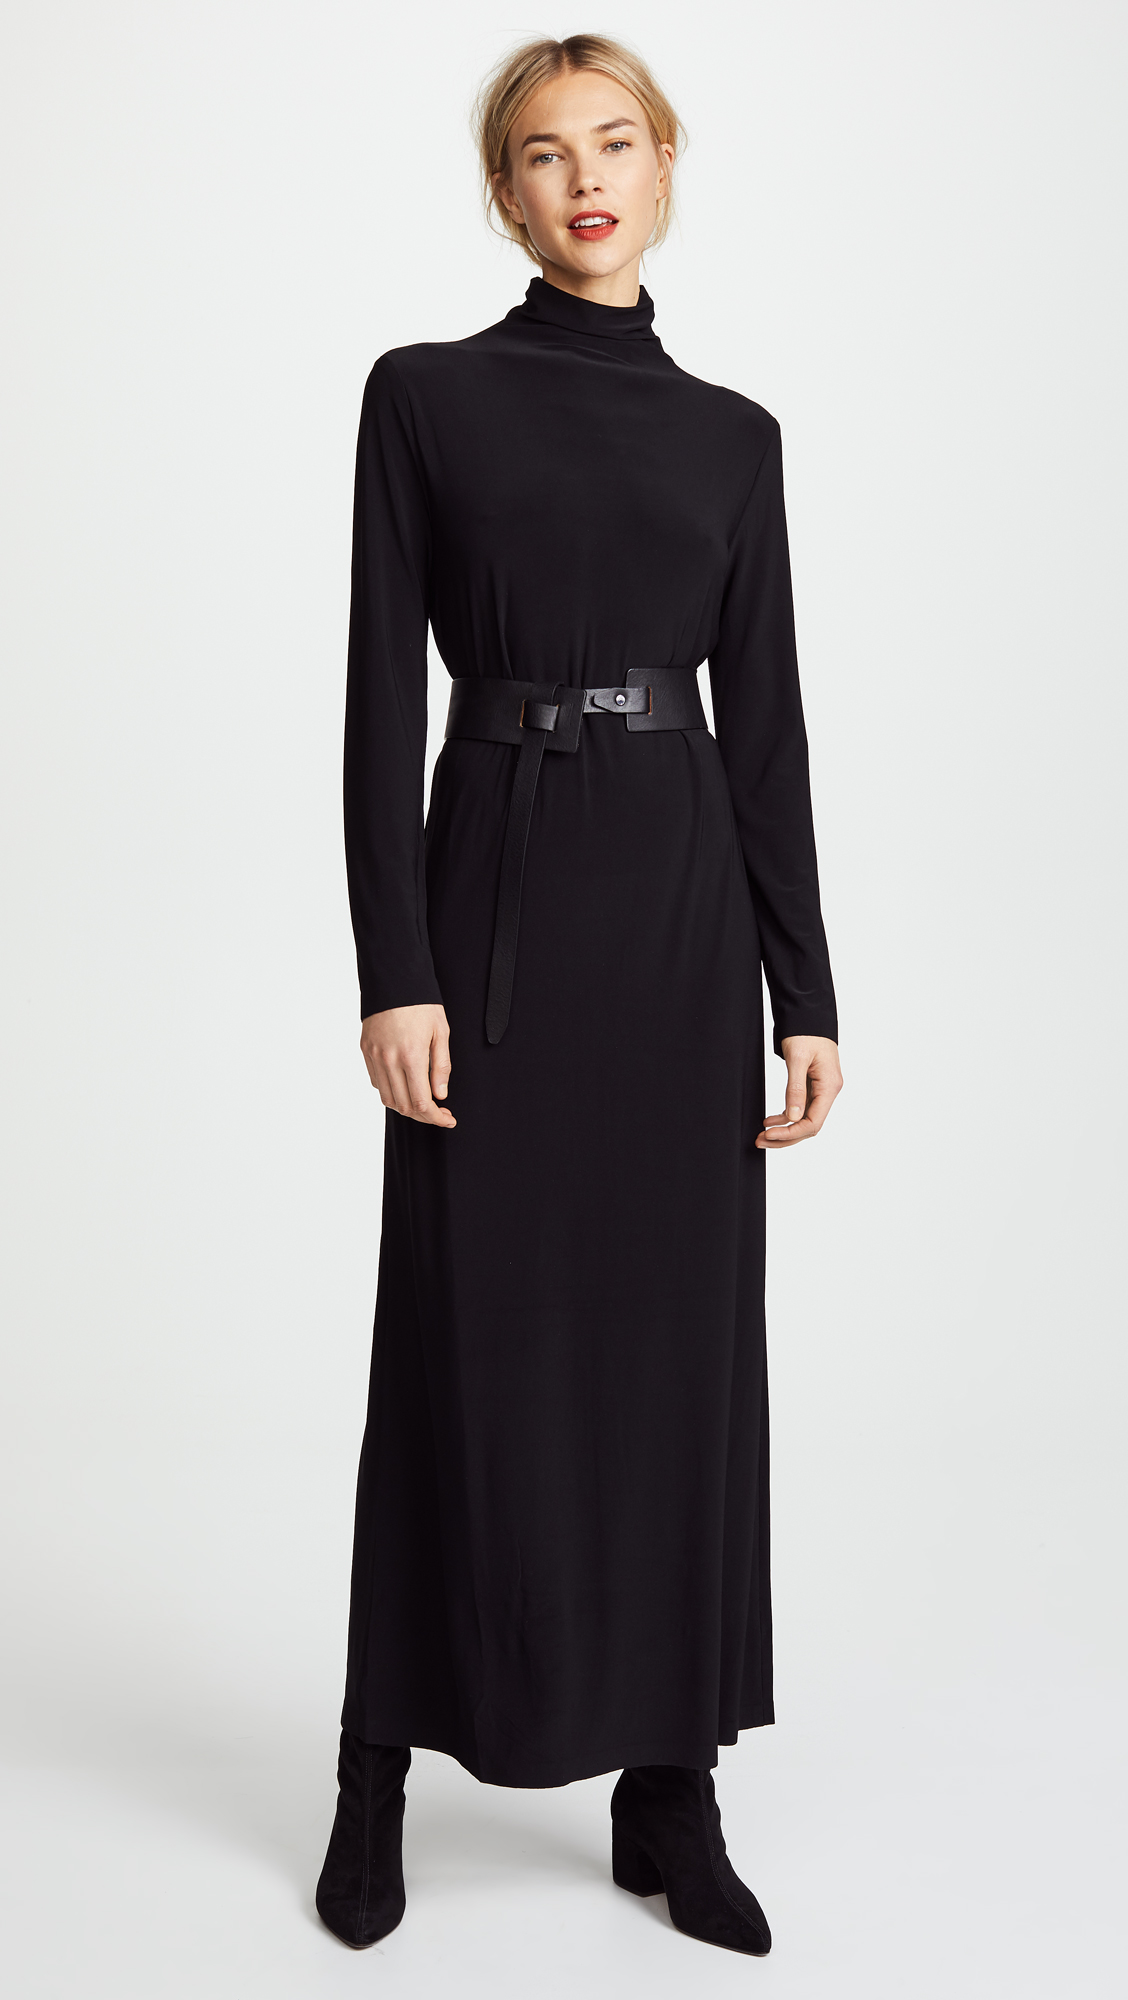 Black Dresses to Help Get You Through Holiday Season | Who What Wear UK